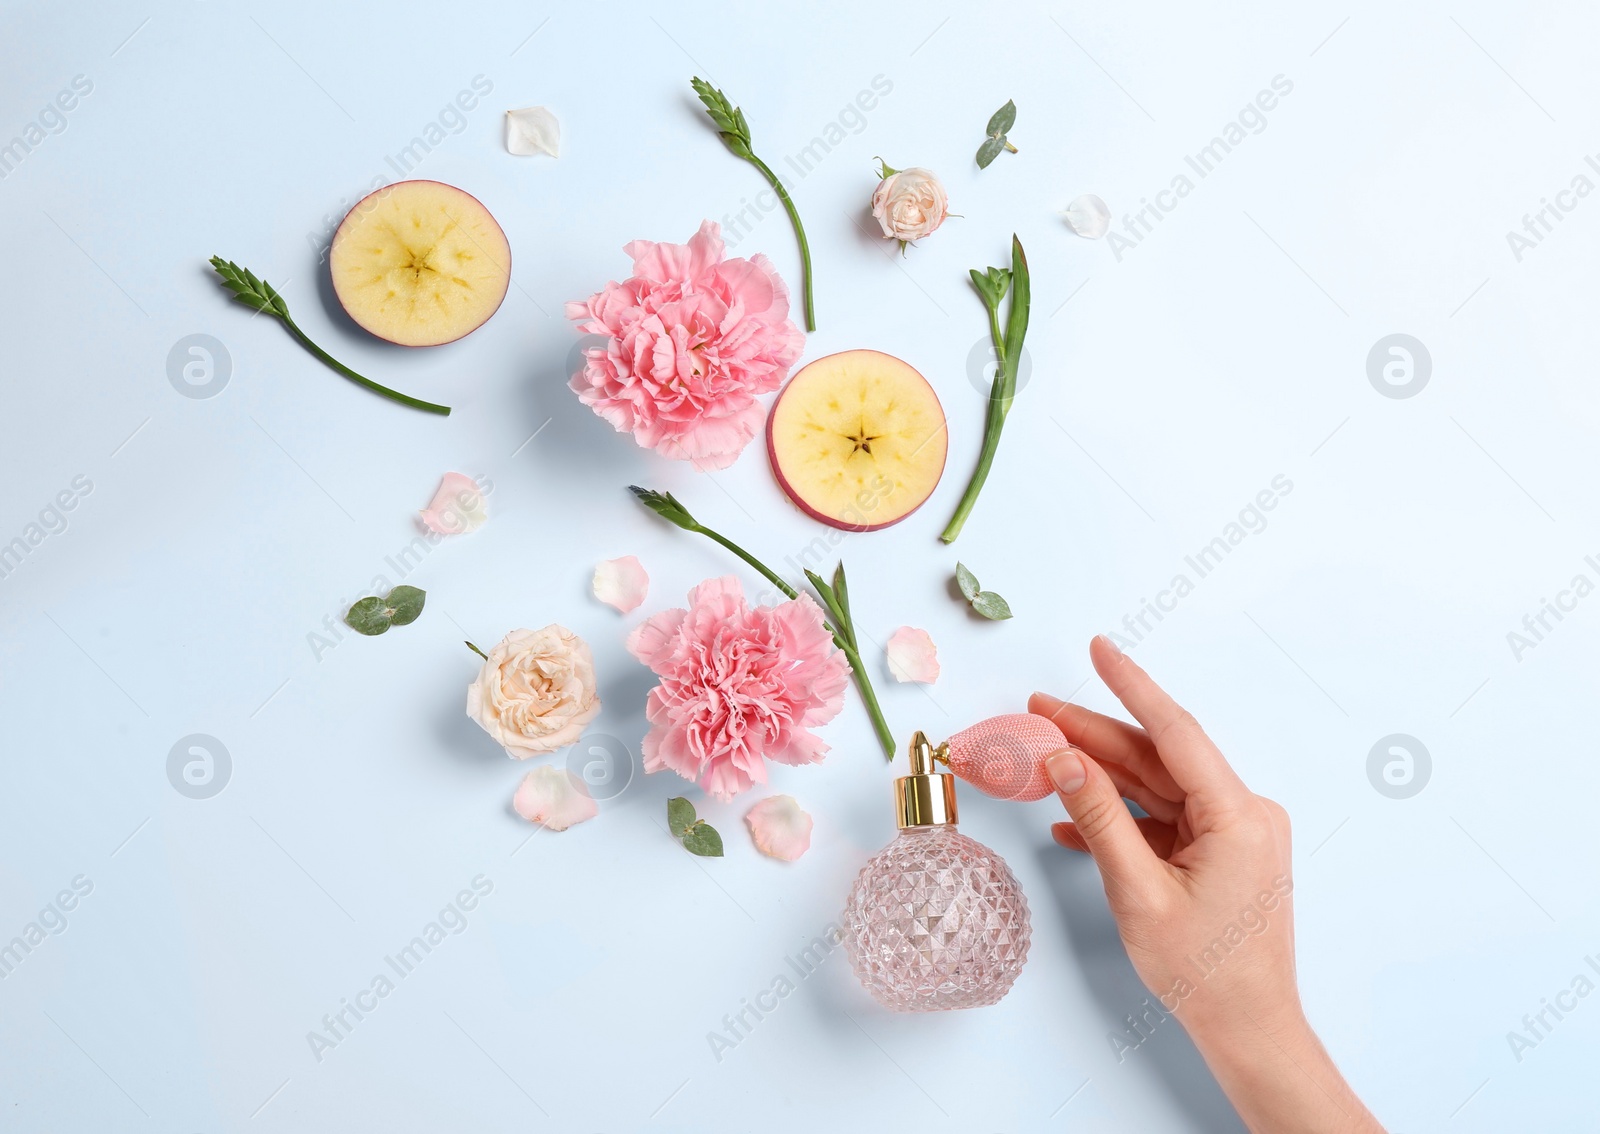 Photo of Top view of woman spraying perfume on white background, apple and flowers representing aroma